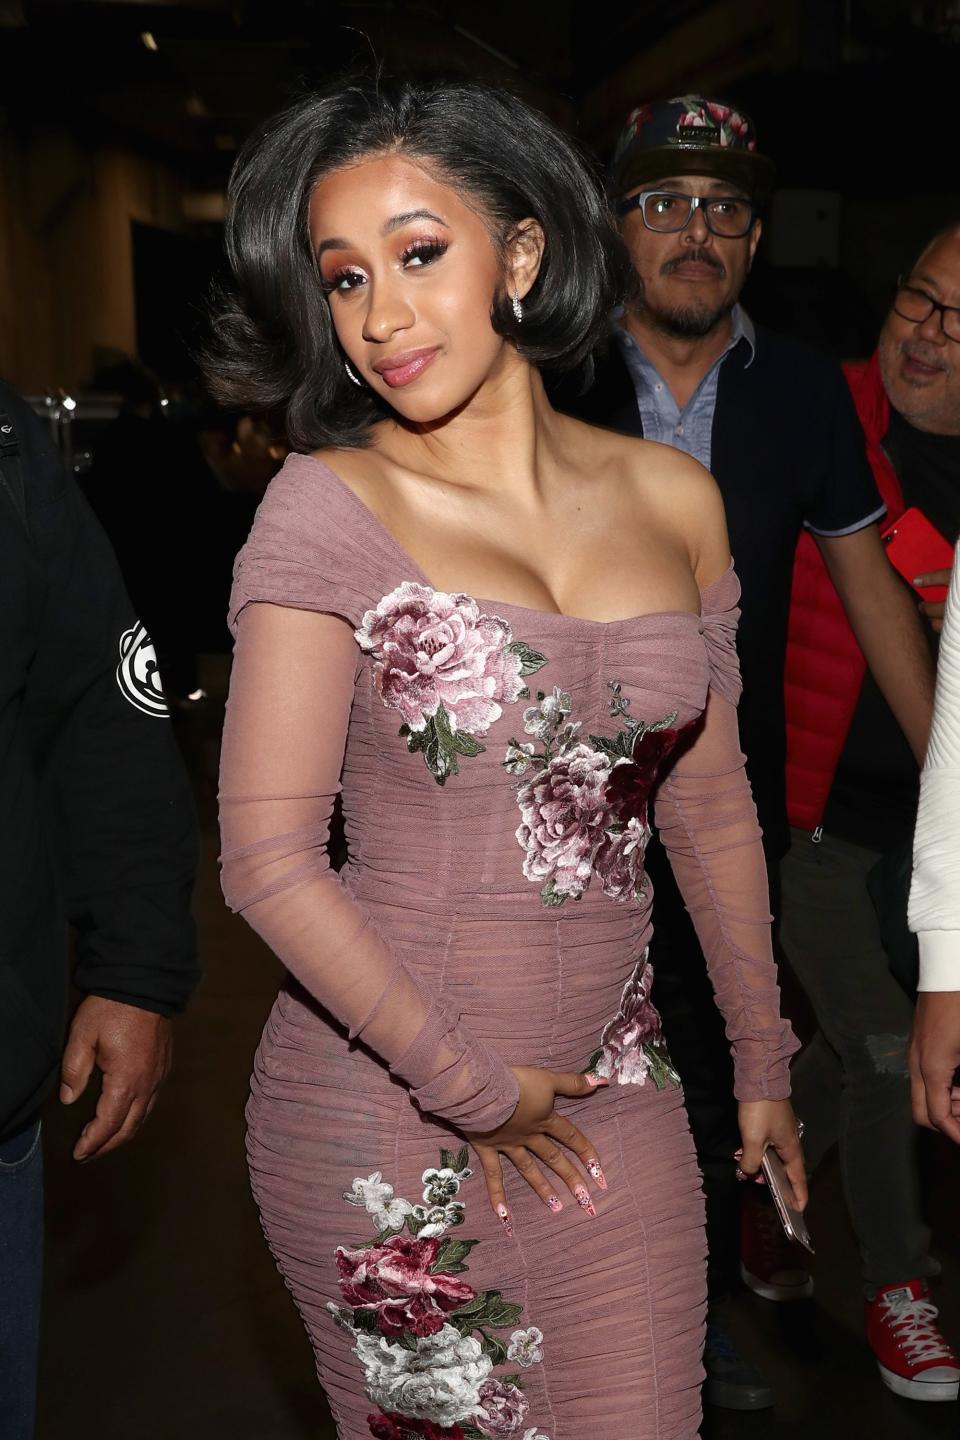 Here are 21 of Cardi B's most transformative (and extreme!) beauty moments in honor of her 26th birthday.